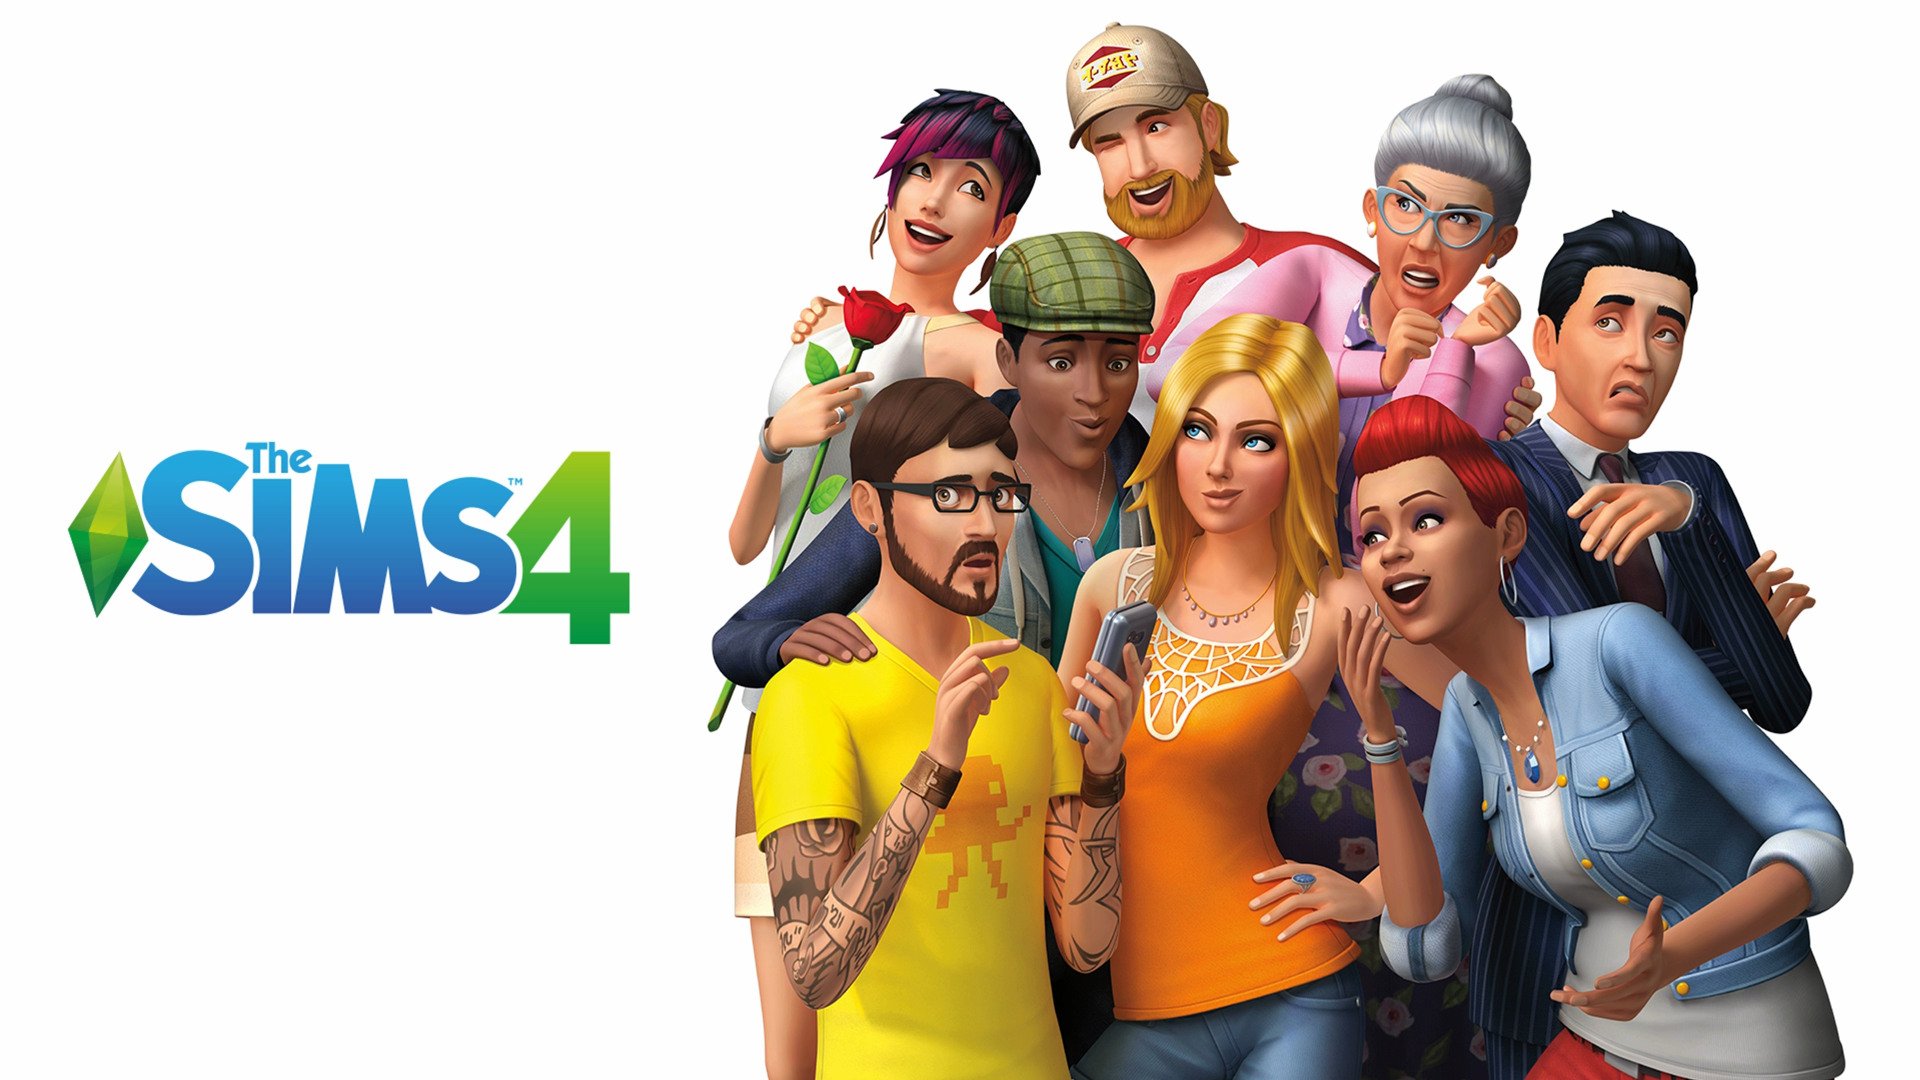 How to Use Keyboard and Mouse Support in The Sims 4